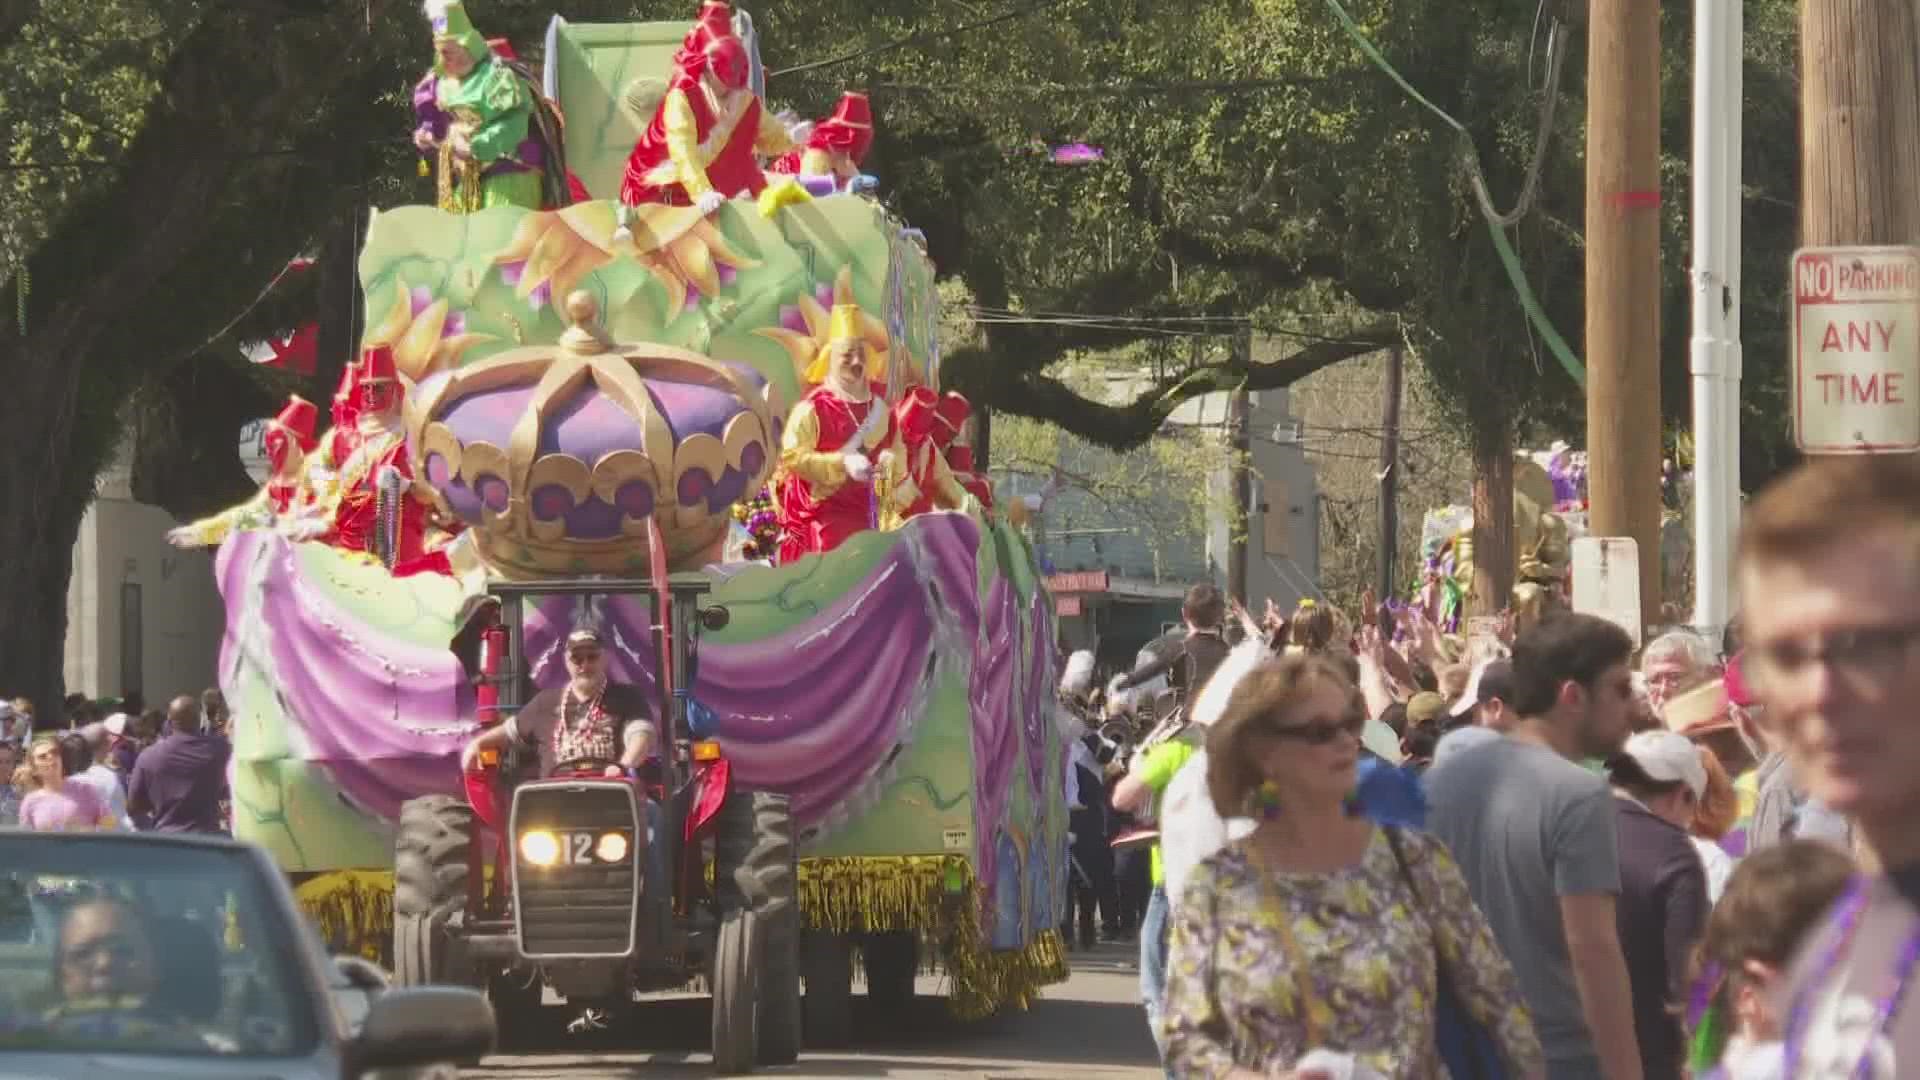 Thoth plans to get the 33 blocks of parade route they lost to NOPD's manpower shortage back this year, but the City says the paperwork hasn't been filed.